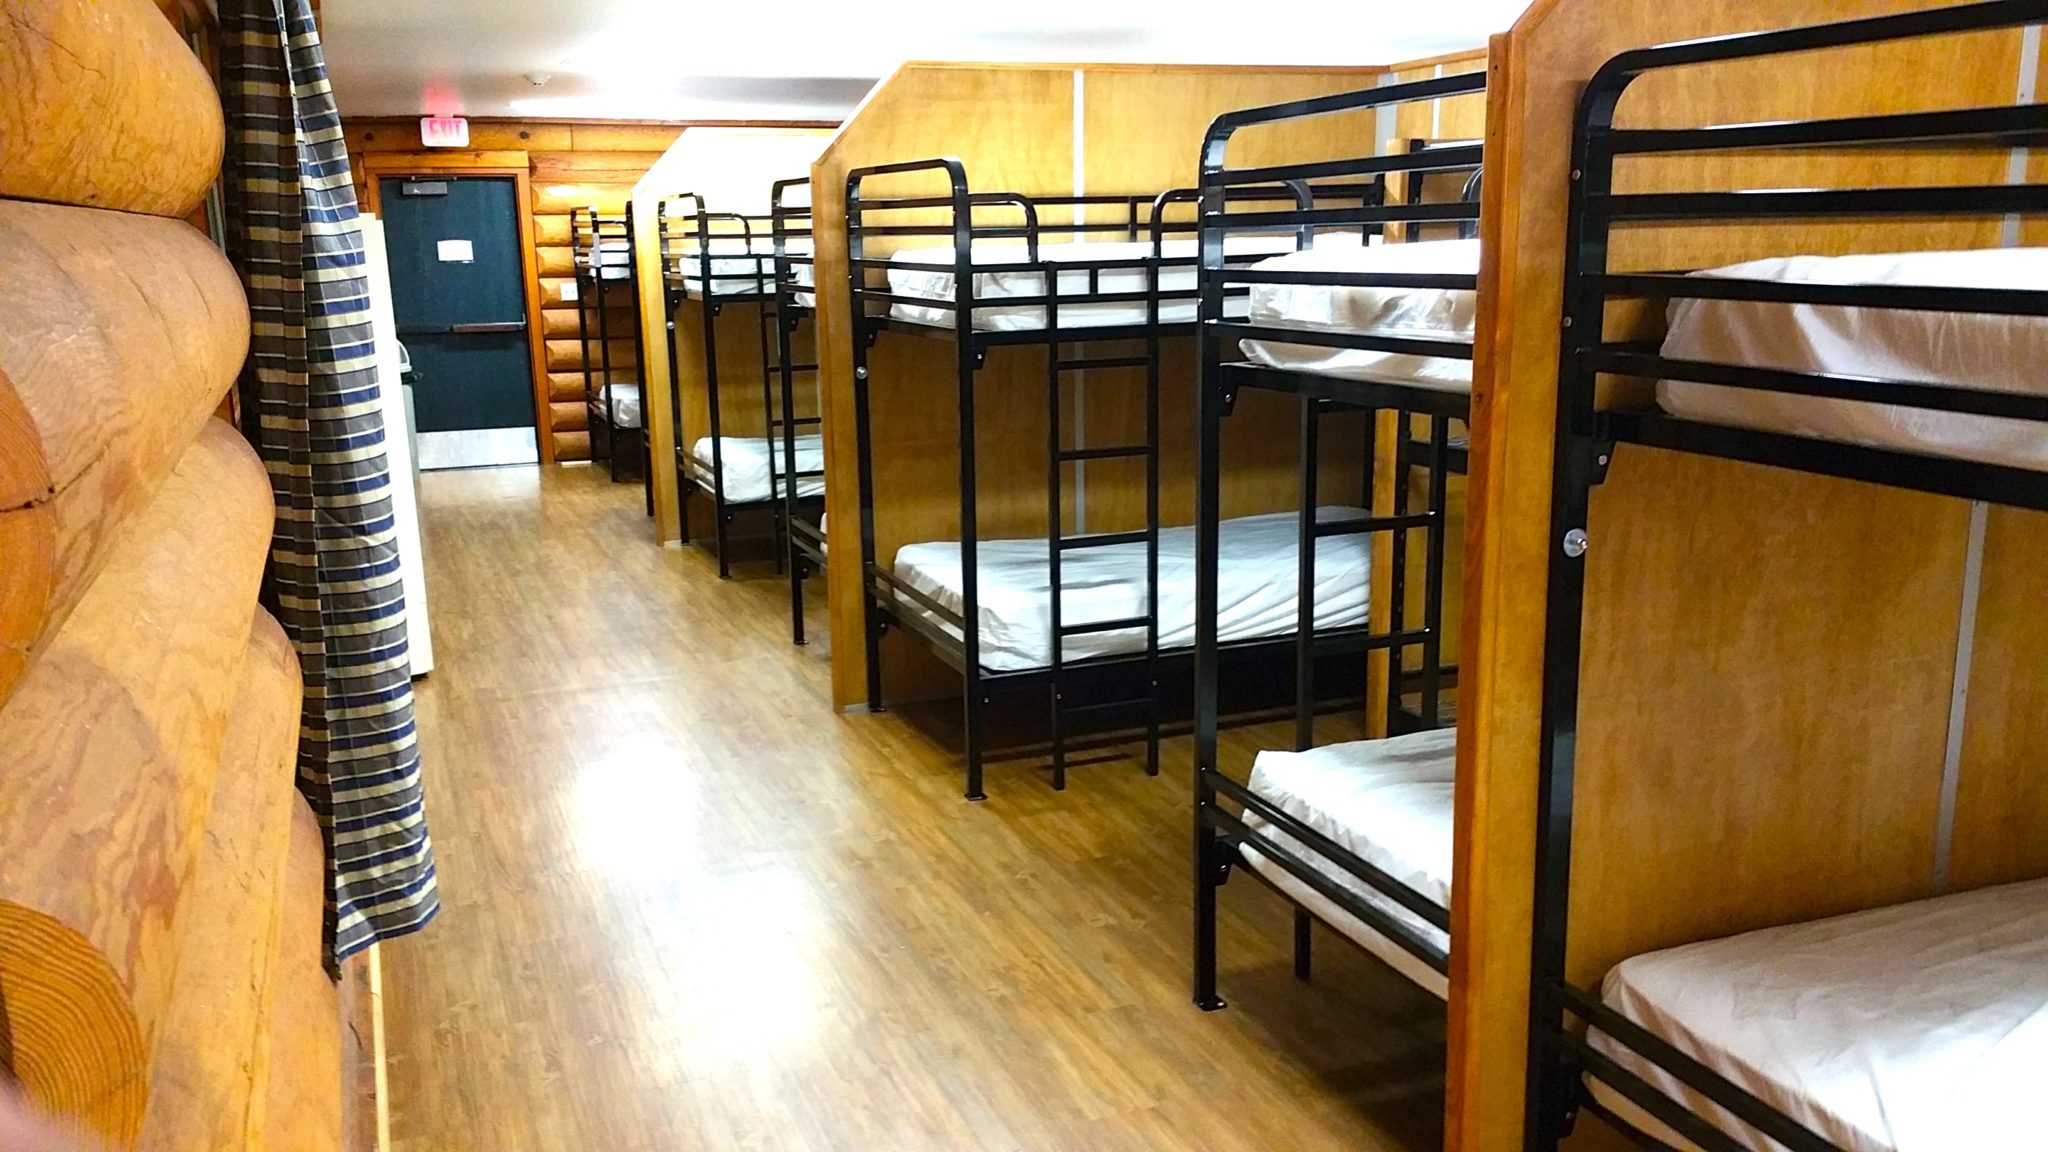 Double Decker Beds For Hostels Sy, Dormitory Bunk Beds Metal